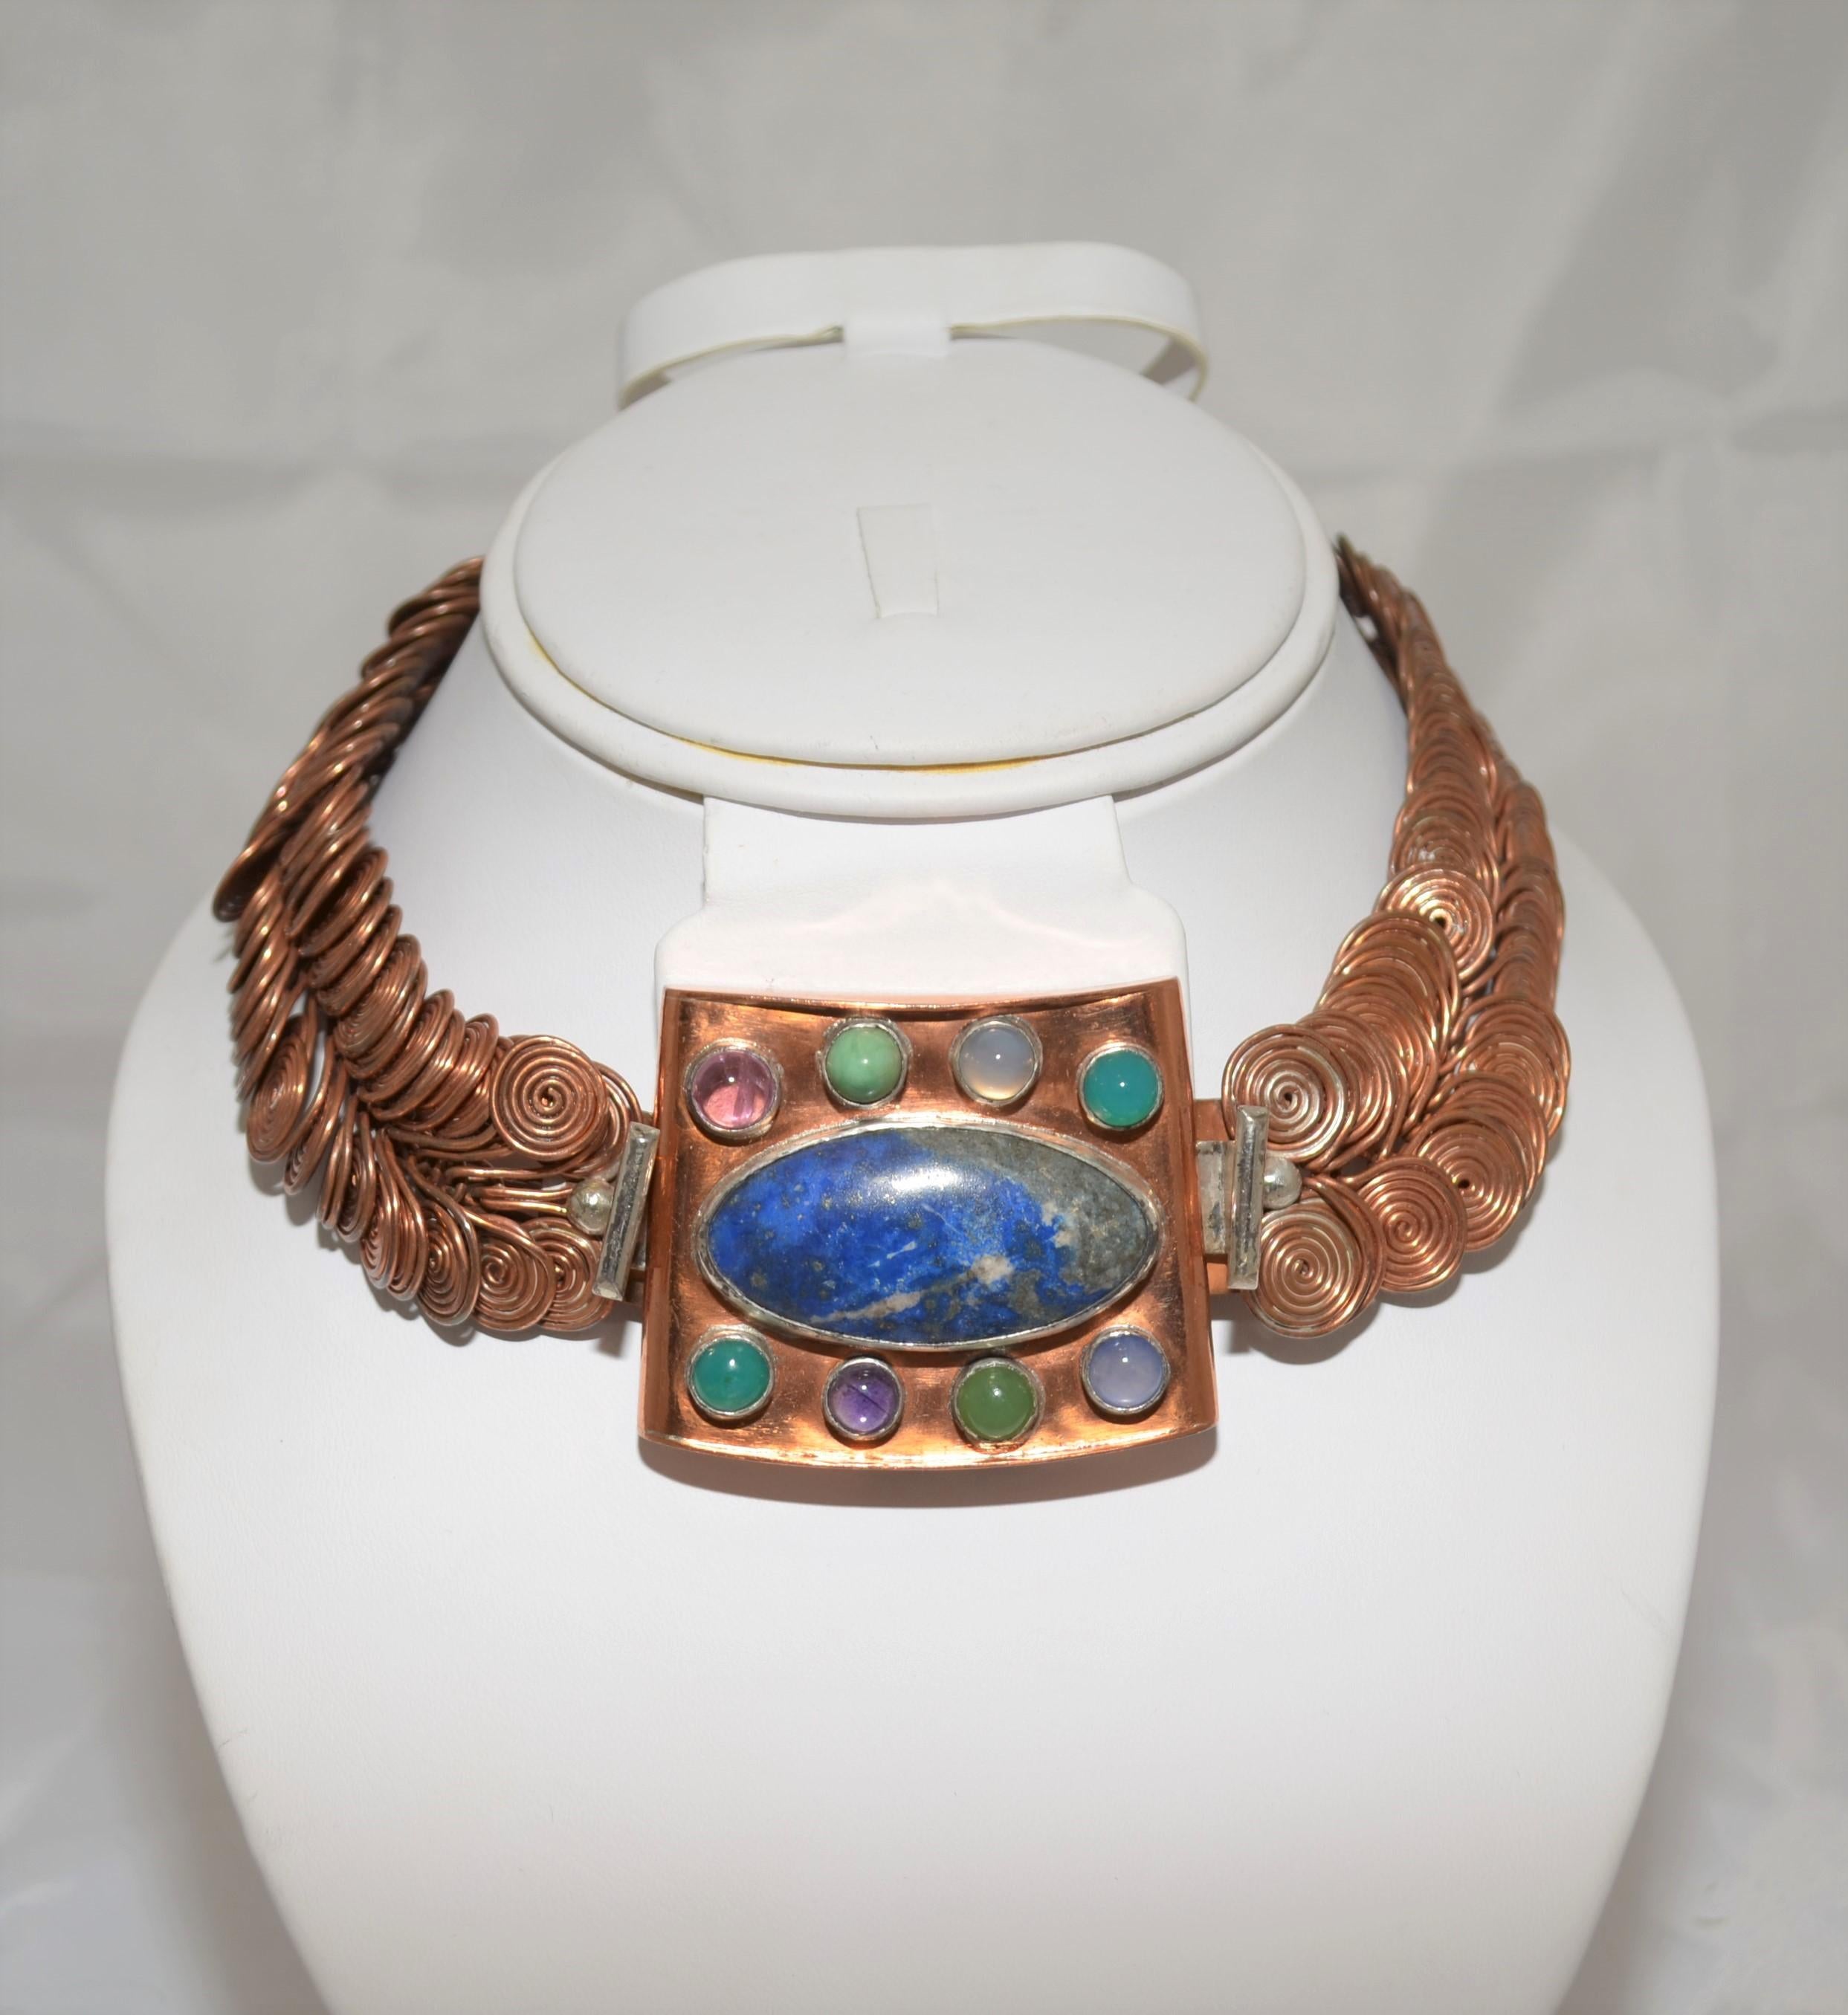 1940's Layola Fourtane Mid-Century Modern Metal Art Sculptural Necklace from Mrs. Gump's Estate --featured in copper metal with multicolored stones that border the pendant with a lapis center stone. Pendant completed detaches from the chain.